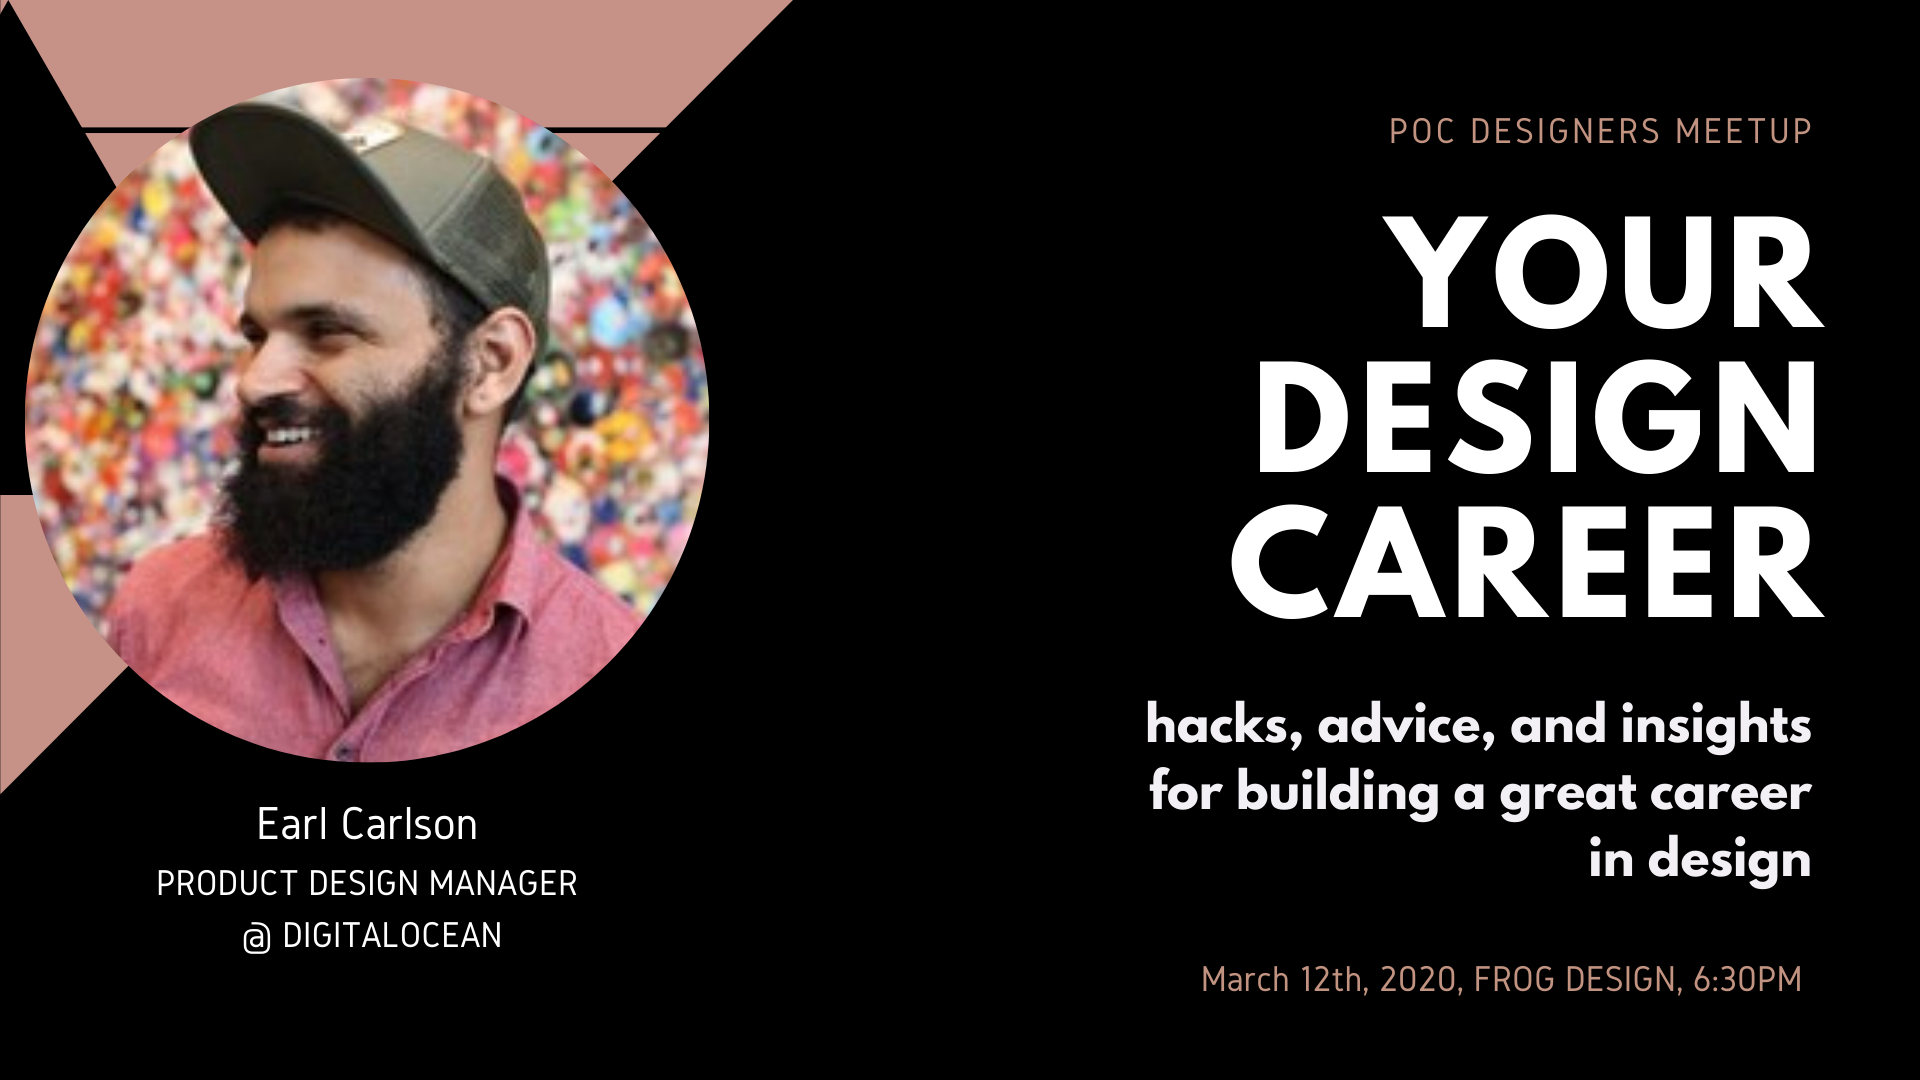 Building you design career: hacks, advice, and necessary insights